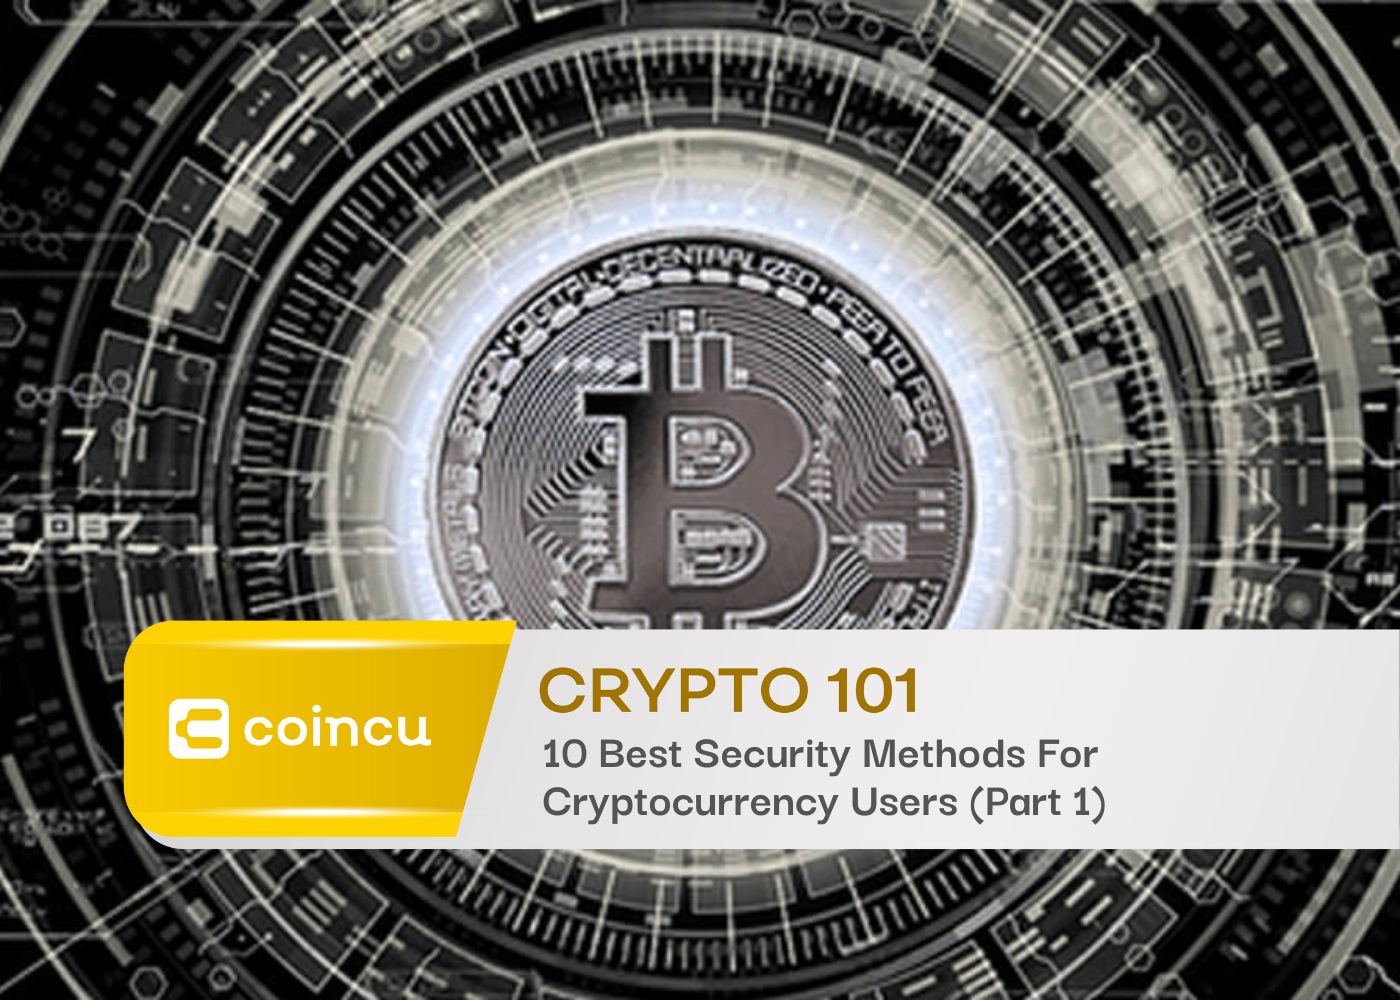 Crypto 101: 10 Best Security Methods For Cryptocurrency Users (Part 1)